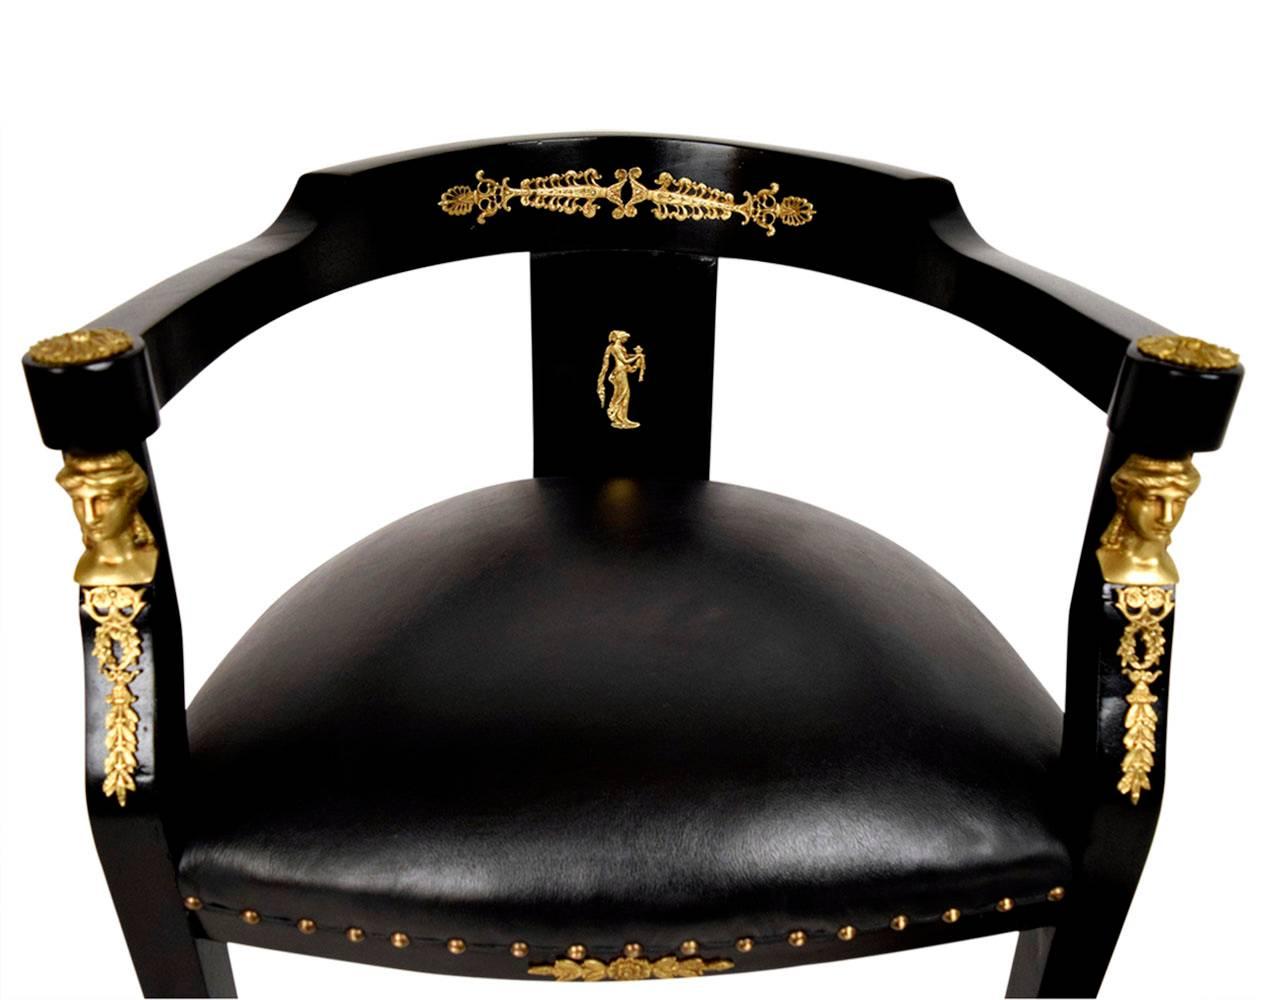 Elegant ebonized 1880s Empire style armchair. Solid wood, newly finished in a rich black color. Has a low curved back, that ends at the arms. Bronze ornaments complement the back, arms and bottom centre. Seat has been professionally upholstered in